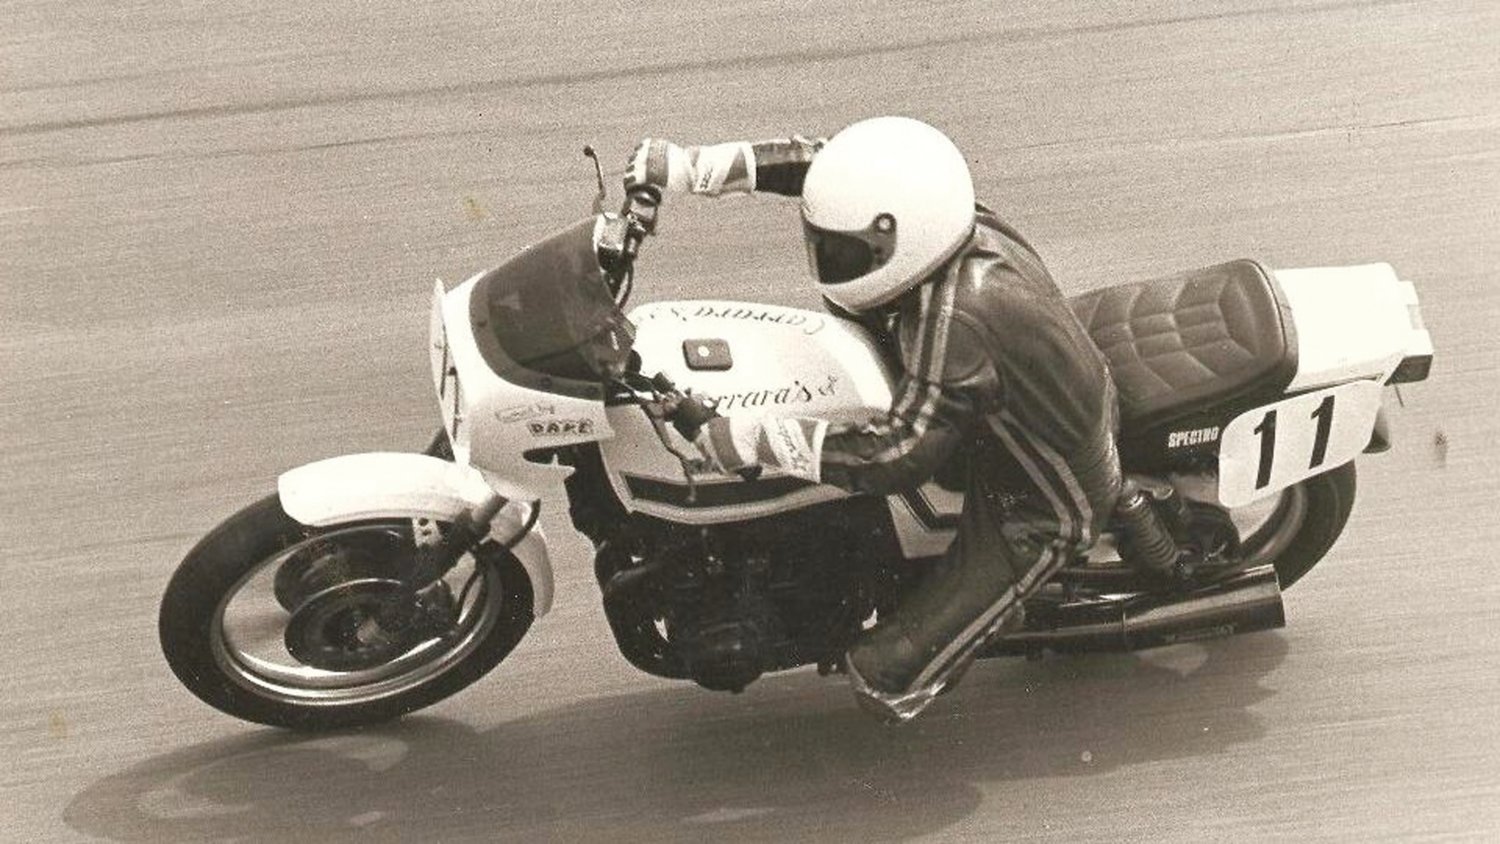 ROCKETS: Dave Carrara built bikes and traveled across the country with Carraras Motorcyle Racing. This photo, circa 1983, shot at Daytona Motor Speedway in Florida, shows off a Kawasaki GPz750 “Tuned by Dave" and raced in the AMA.